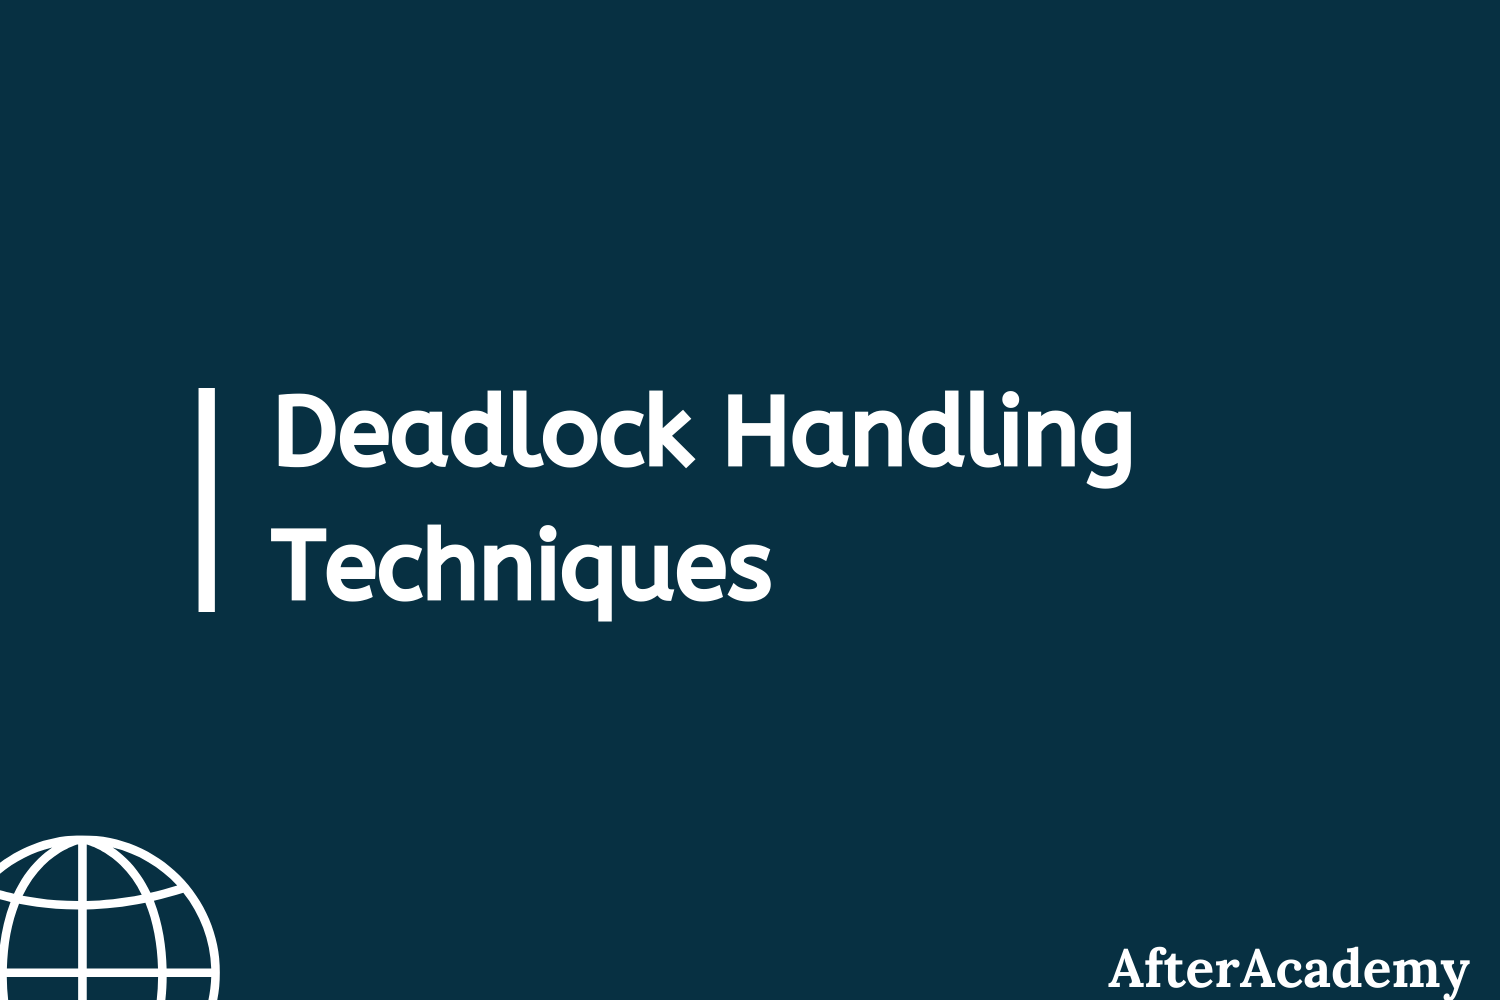 What are Deadlock handling techniques in Operating System?